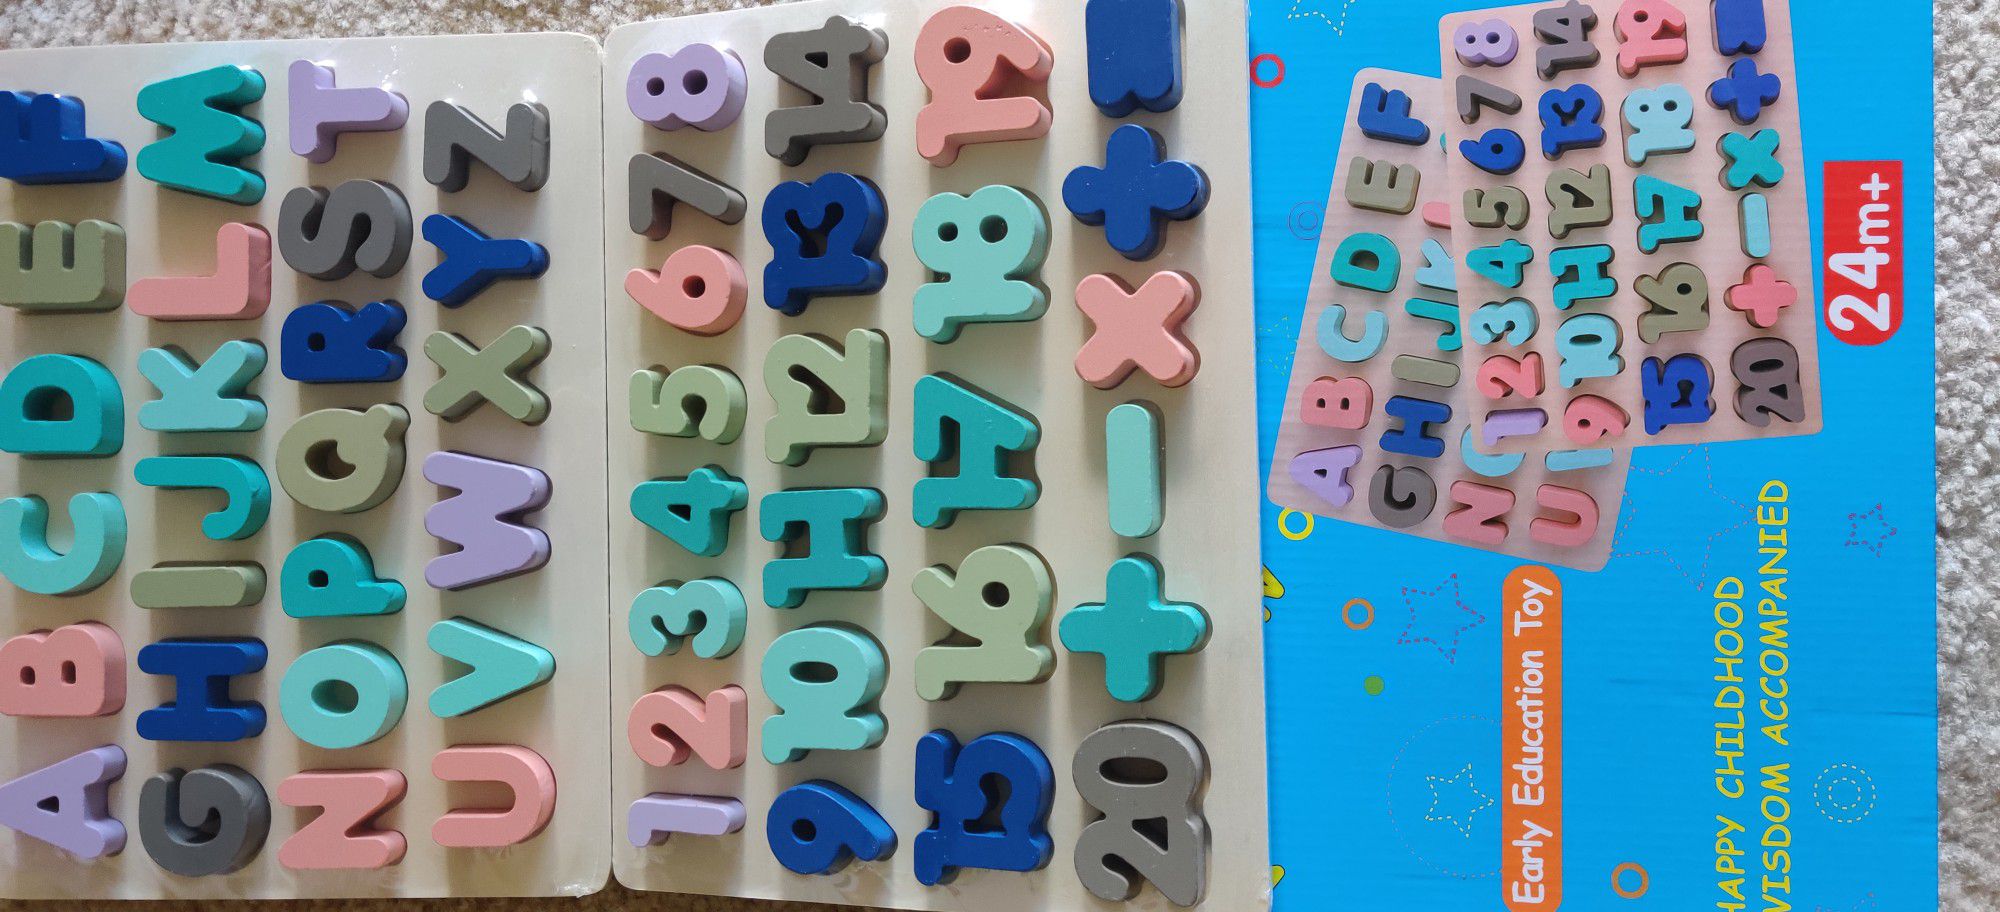 Wooden Peg Puzzles for Toddlers Alphabet & Number Puzzles for Kids,- Letters, Numbers, Learning Toys Gift for Girls and Boys (2Pack)